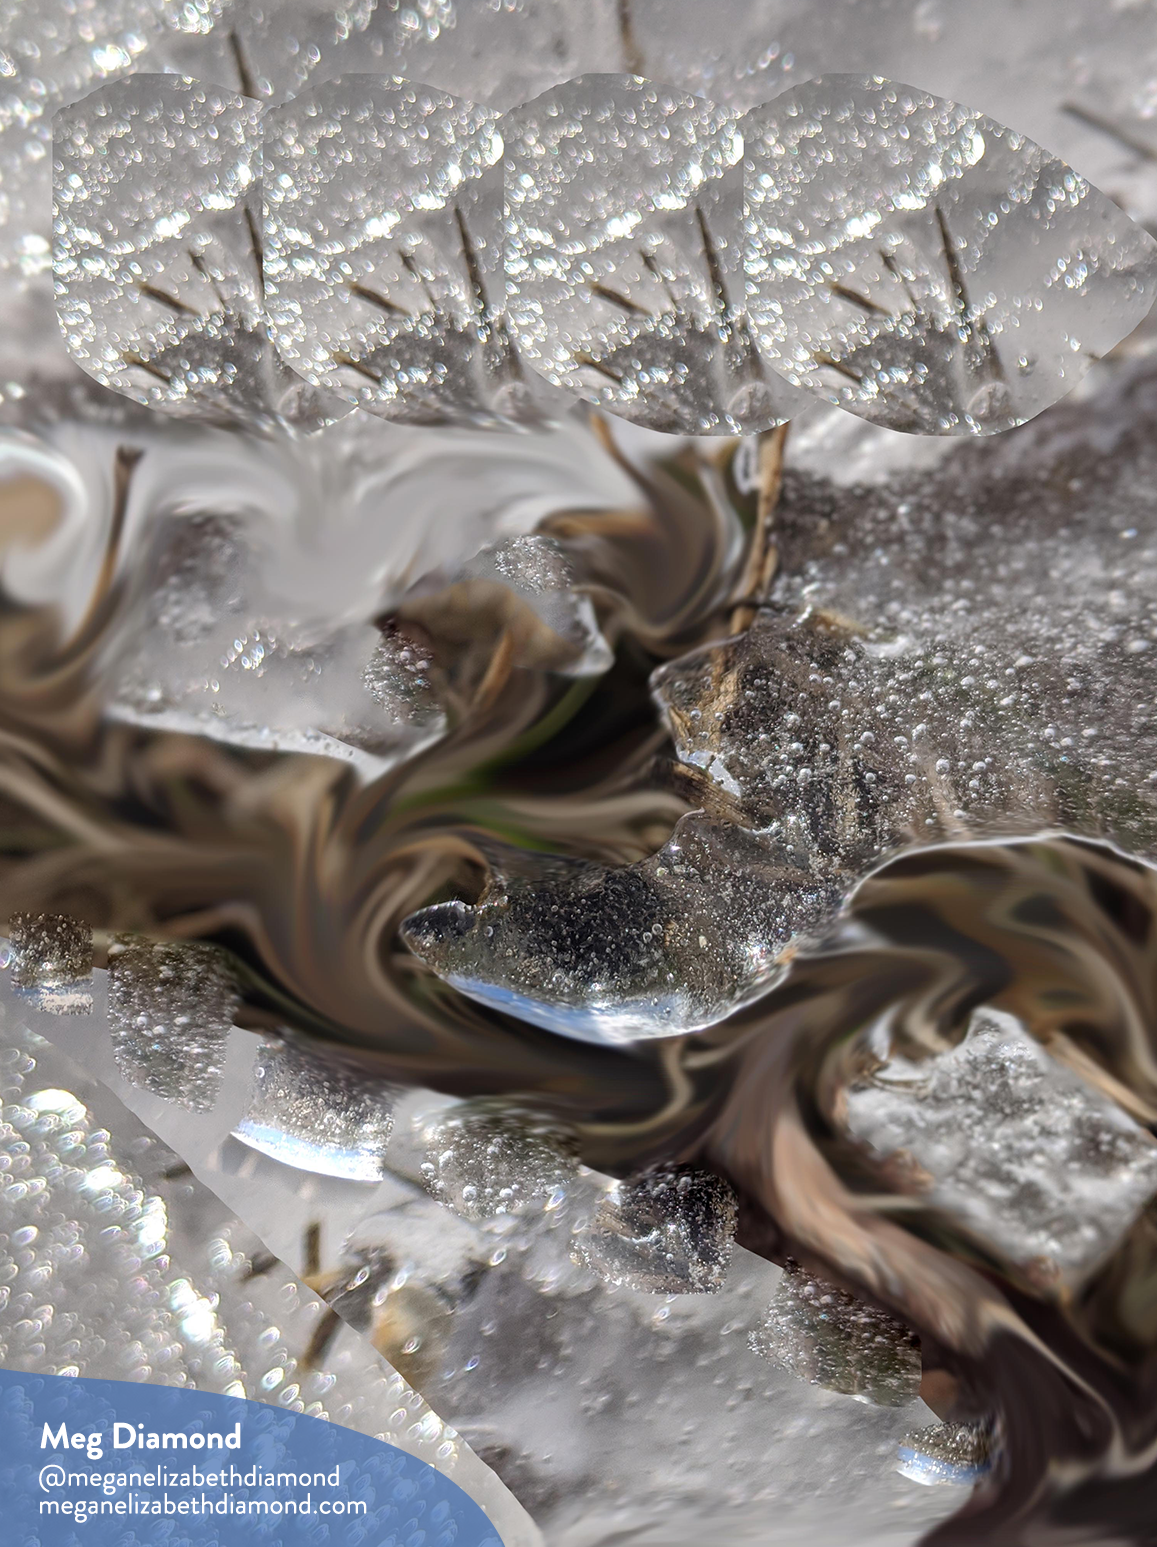 Cropped portrait photo of collage artwork by Meg Diamond, features imagery of ice and earth swirled together like a whirlpool. The image has a watermark with Meg’s name, instagram handle (@meganelizabethdiamond) and website (meganelizabethdiamond.com)